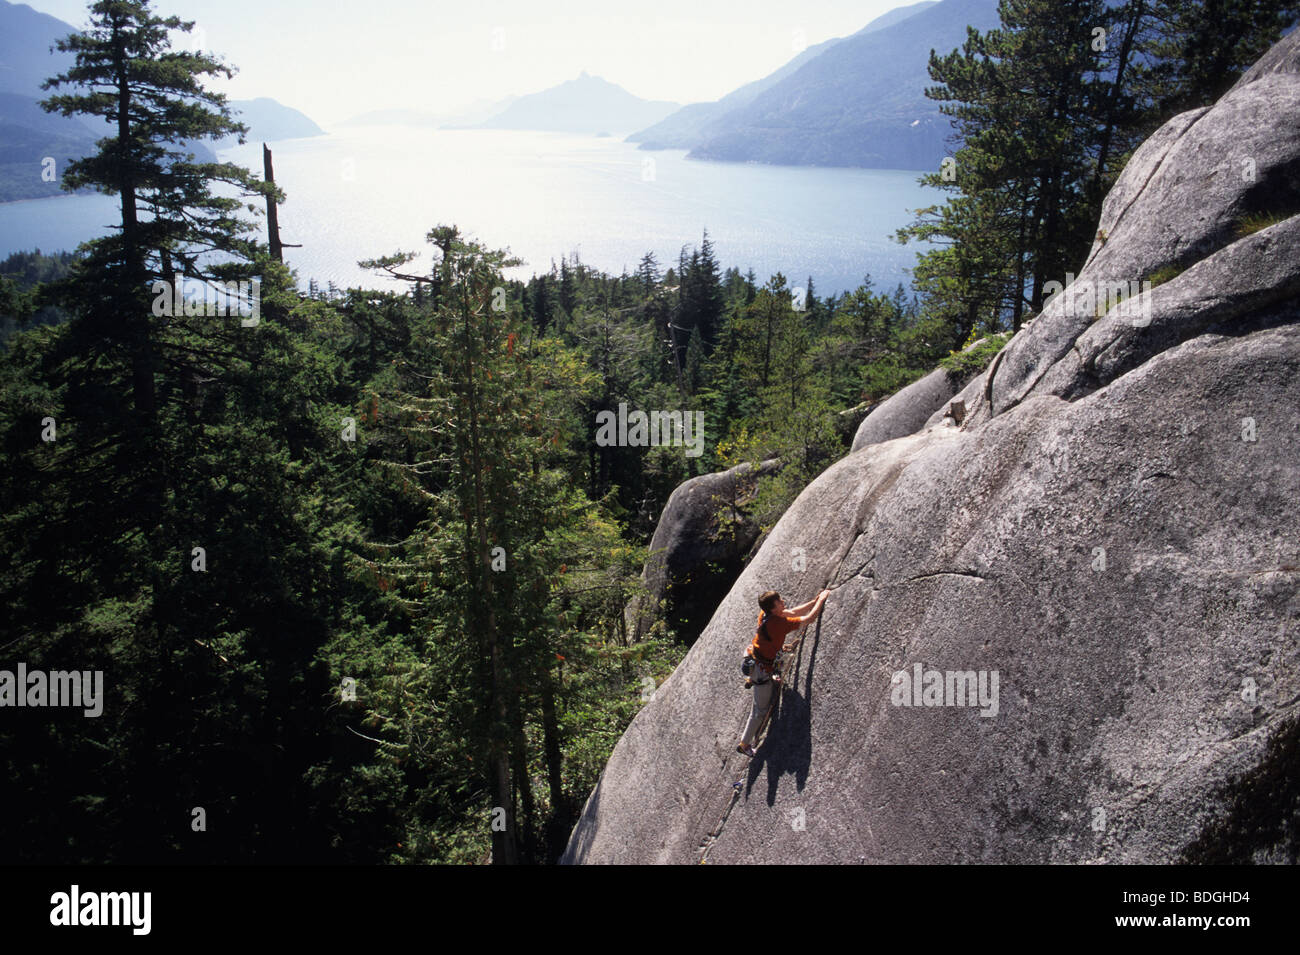 A man rock climbing with water in the background in Squamish, British Columbia, Canada. Stock Photo